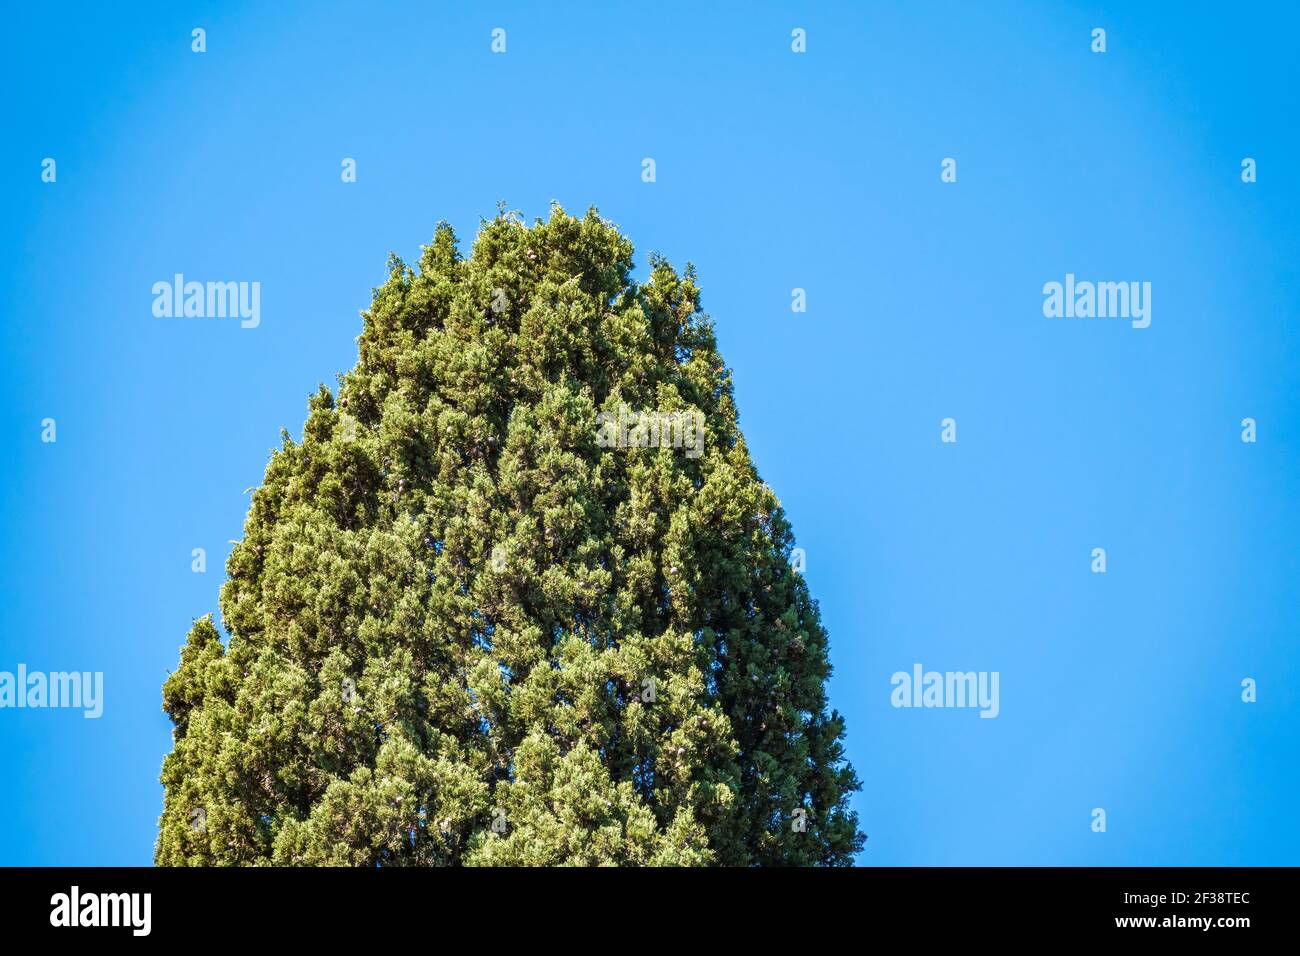 The top of Cupressus tree on blue sky background. Tall evergreen tree with a pyramidal crown Stock Photo